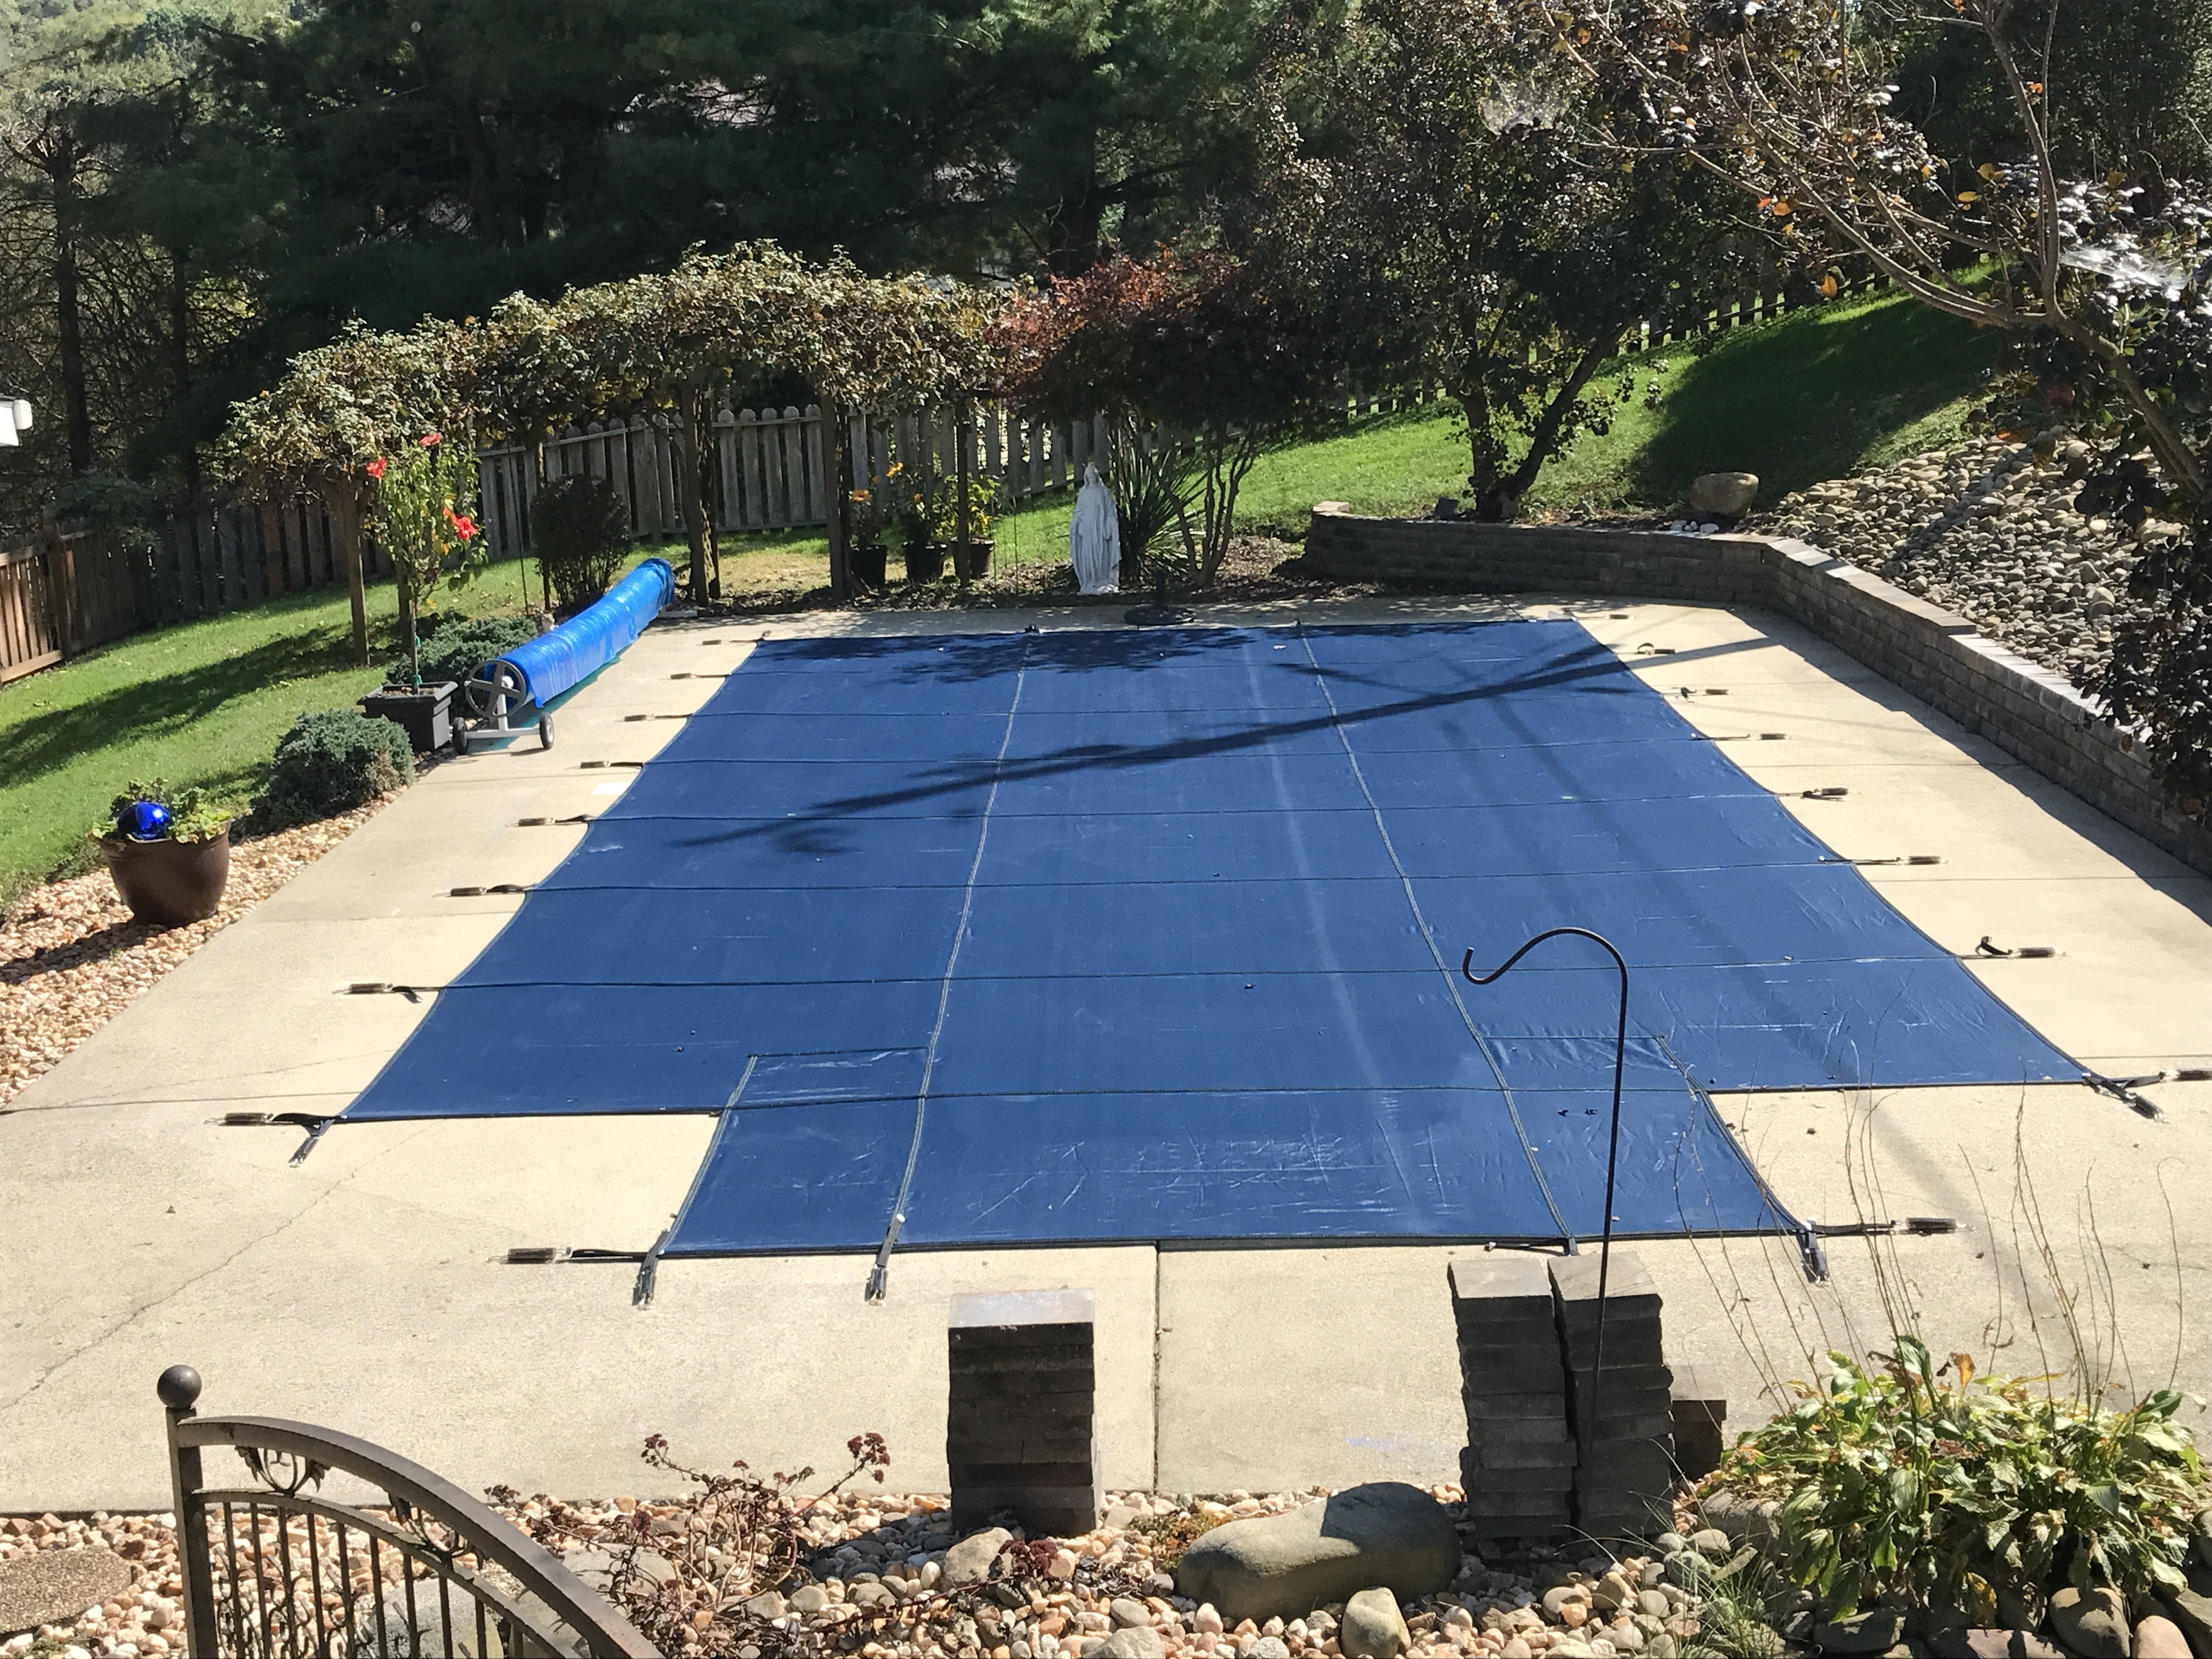 16'x32' Cover Mate For Under Mesh Swimming Pool Safety Cover Blocks Sunlight 